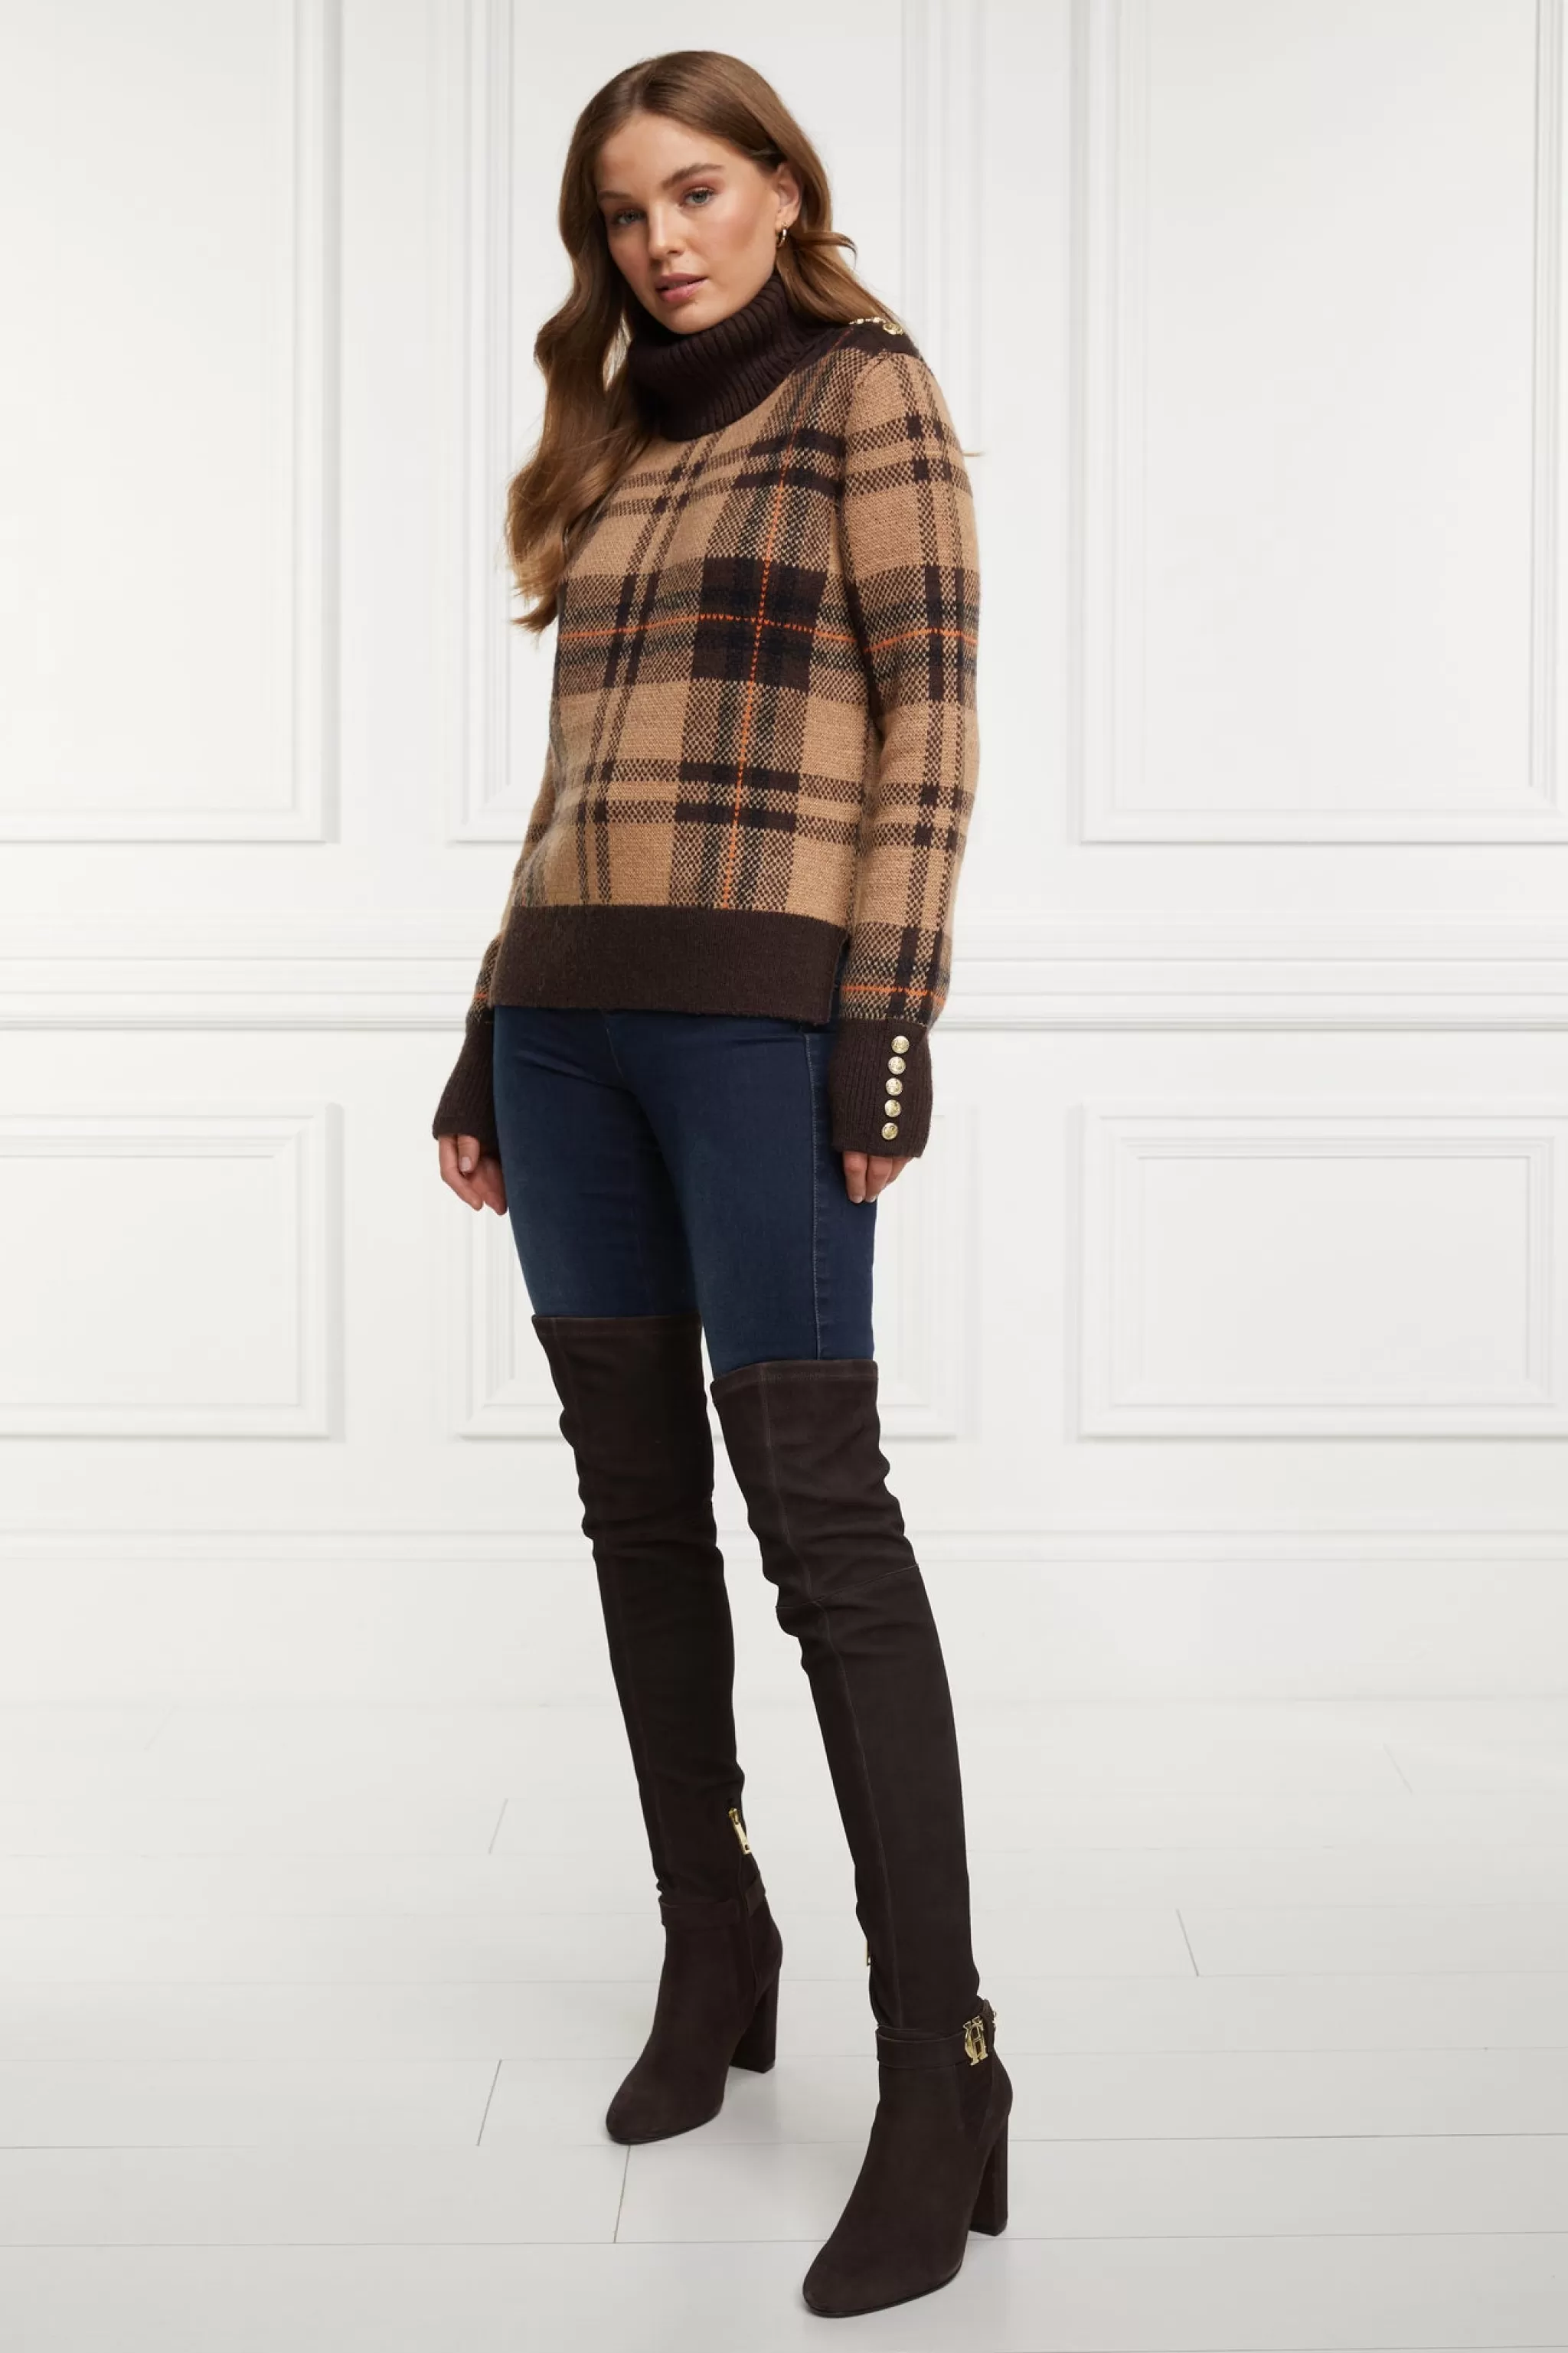 Sloane Over The Knee Boot>Holland Cooper Outlet